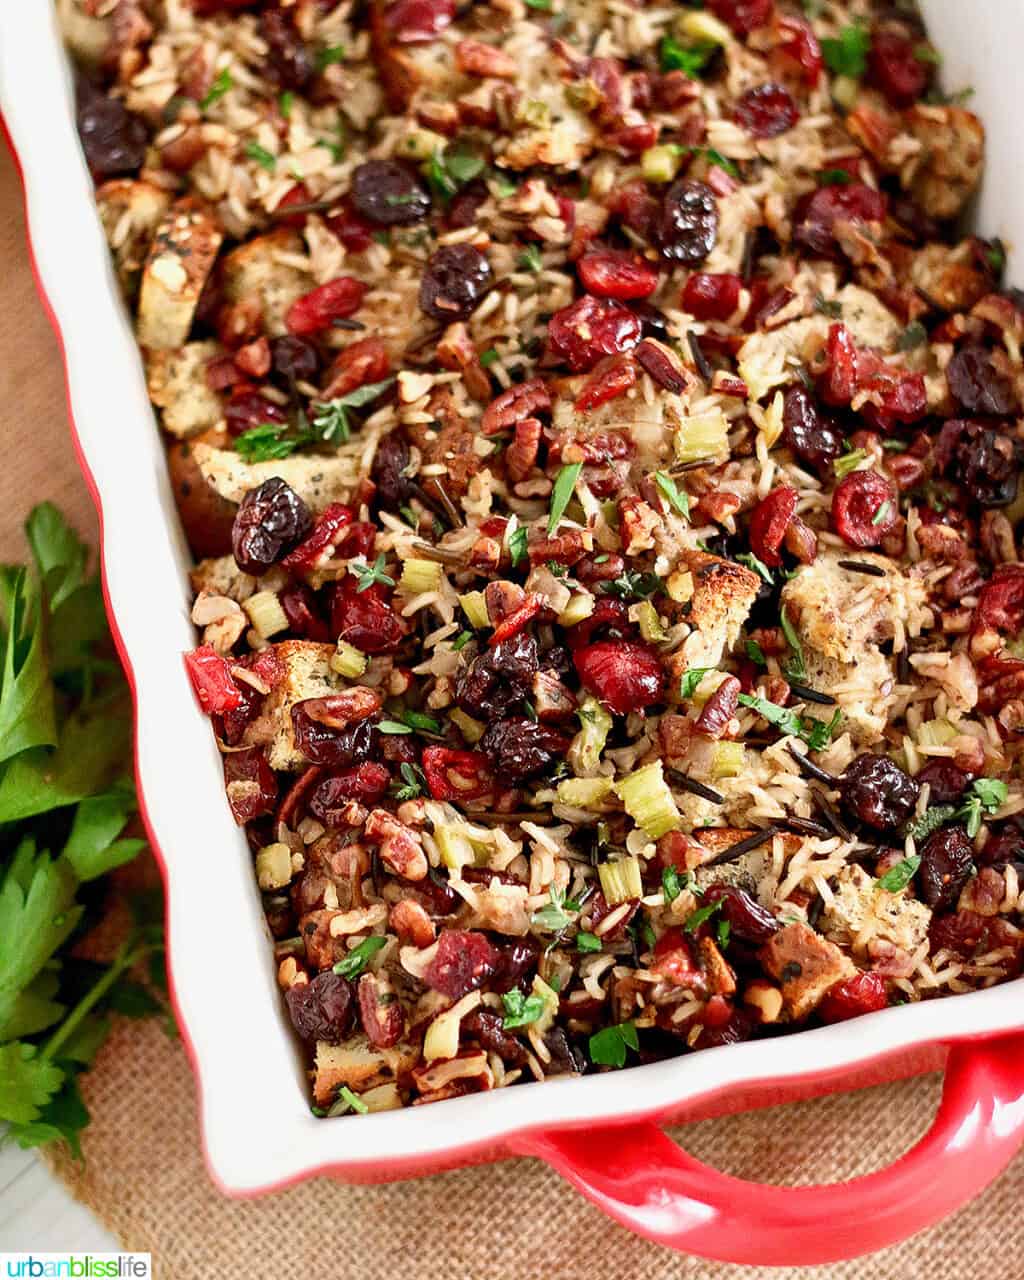 cranberry stuffing with wild rice and cherries in a casserole dish.